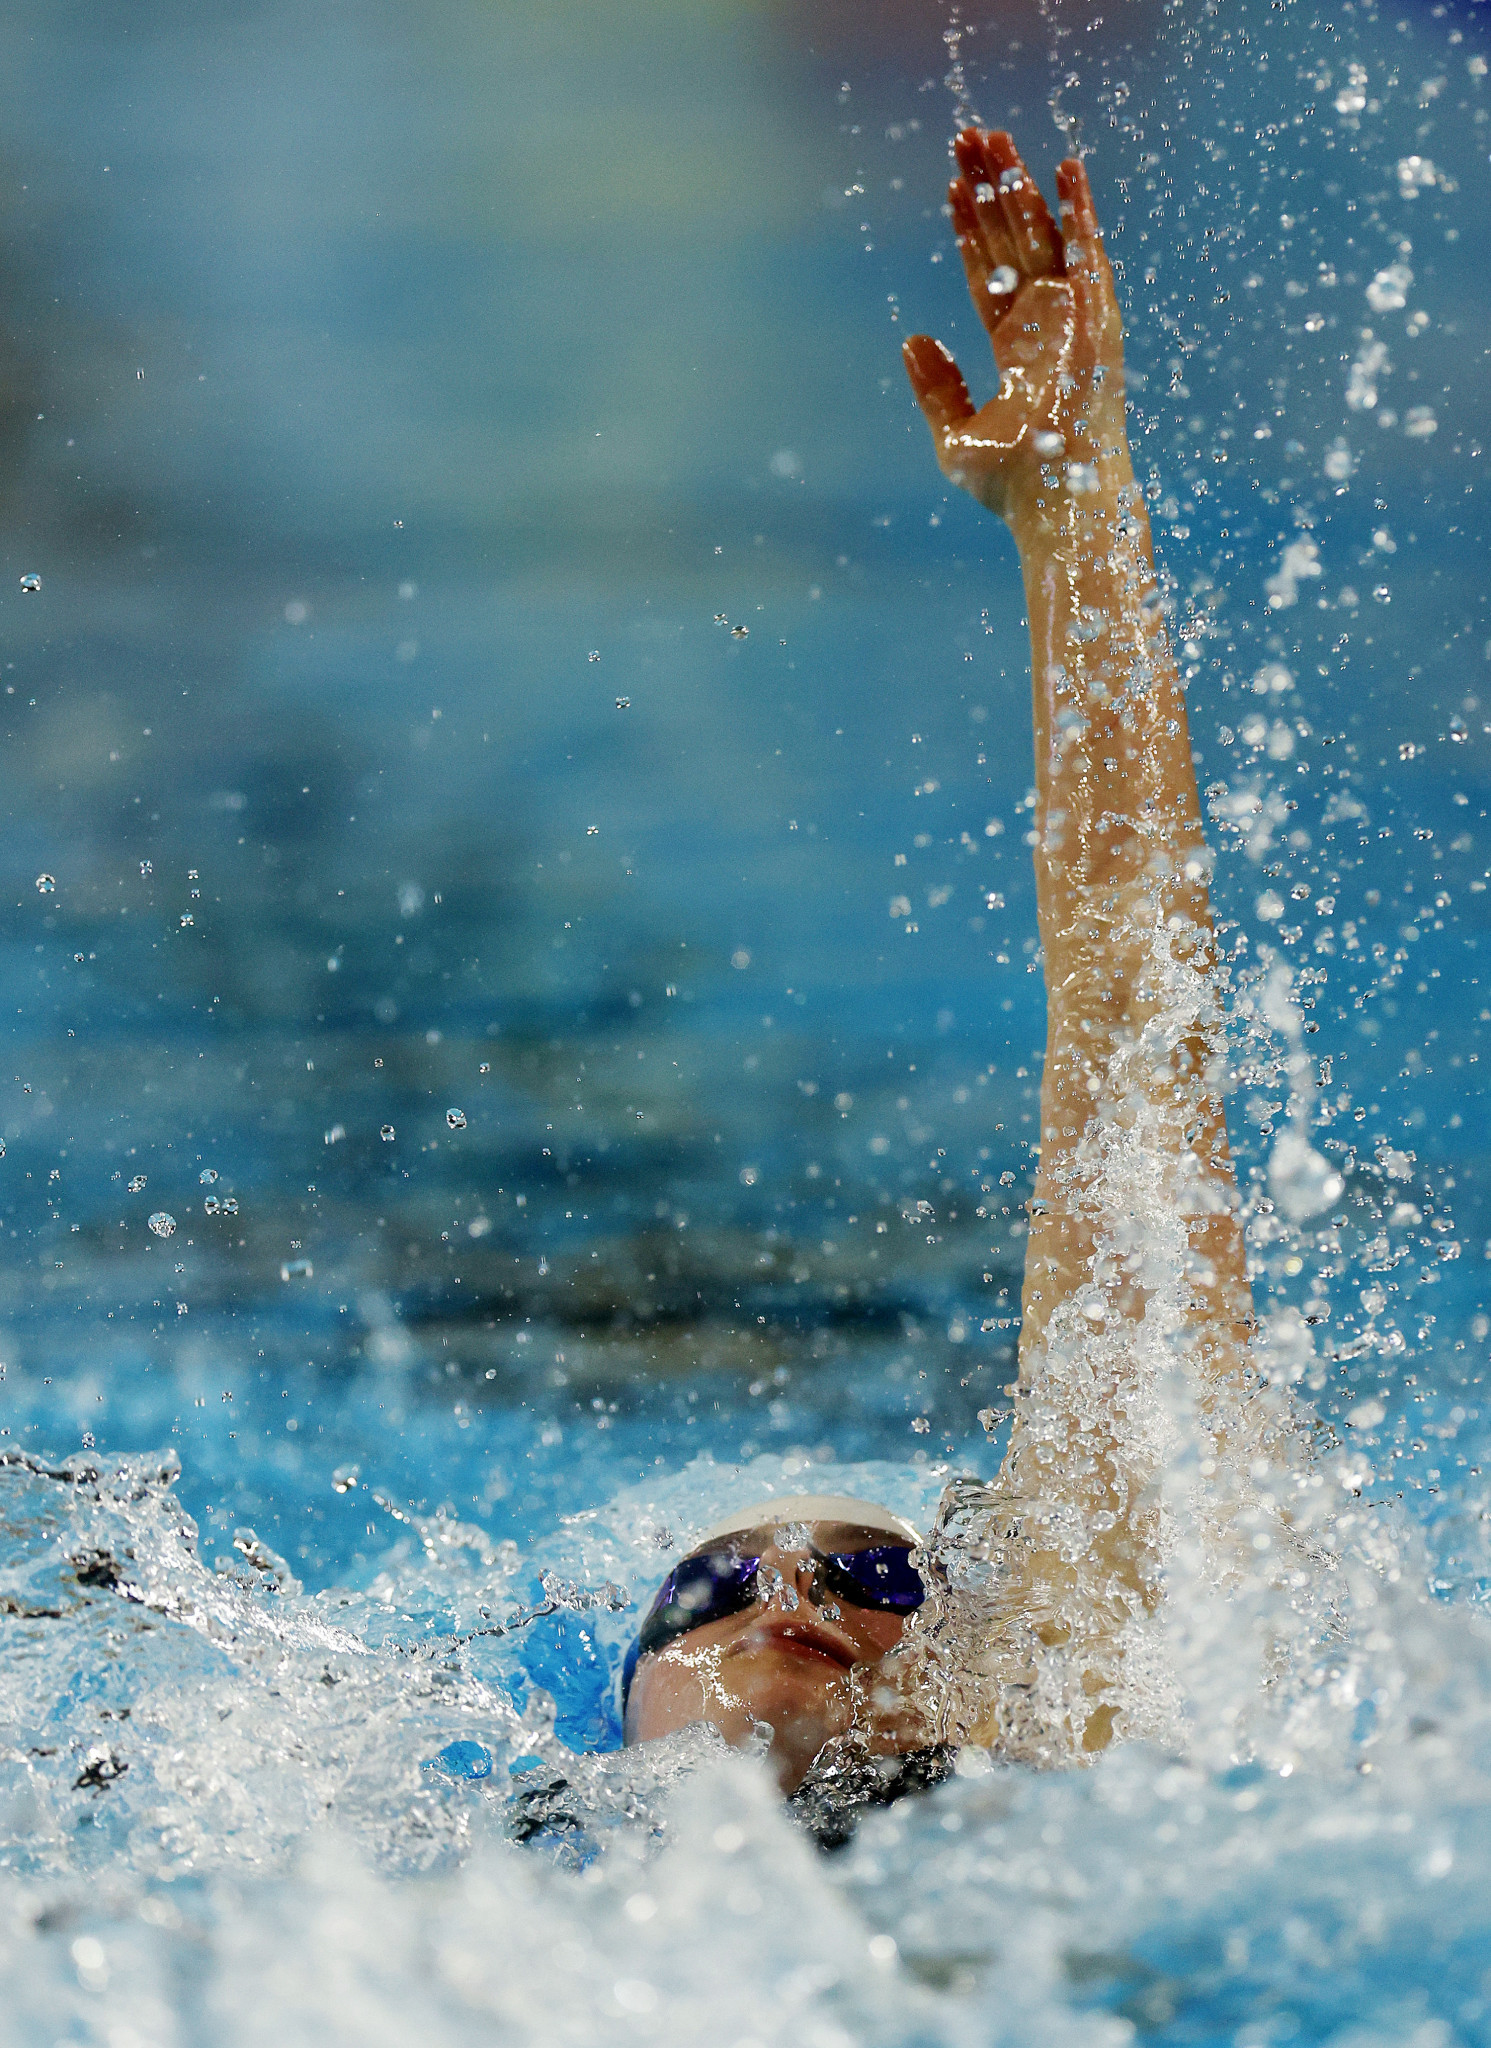 Holly McGill narrowly took victory in the women's 100m backstroke final for Scotland ©Getty Images